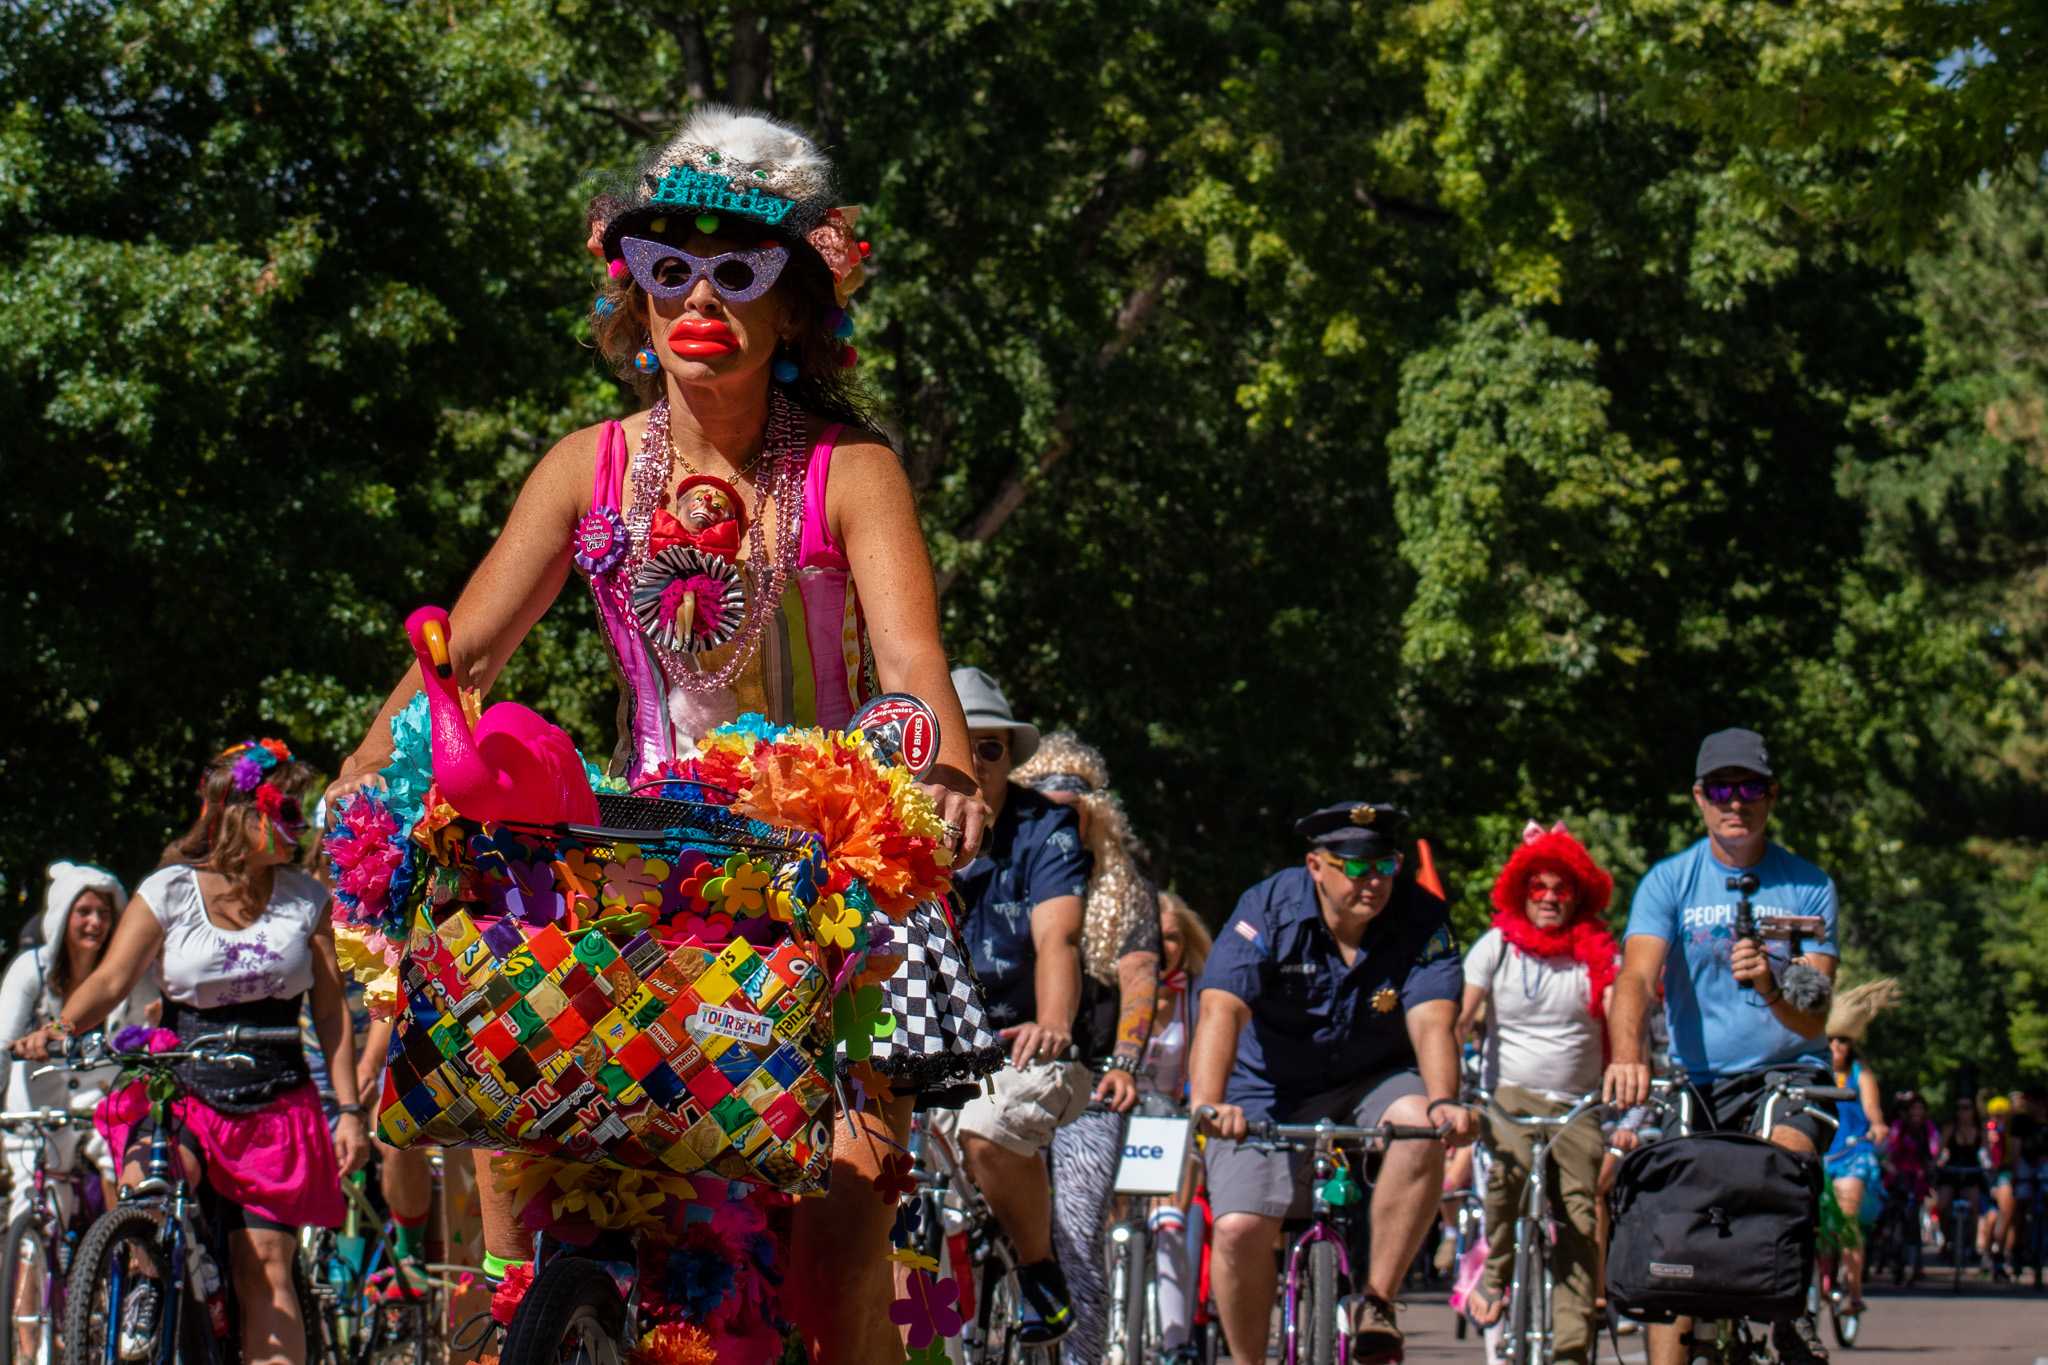 Fort+Collins+residents+participated+in+the+annual+city-wide+party+known+as+Tour+de+Fat.+Beer+and+bikes+are+at+the+forefront%2C+and+over-the-top+costumes+are+highly+encouraged.